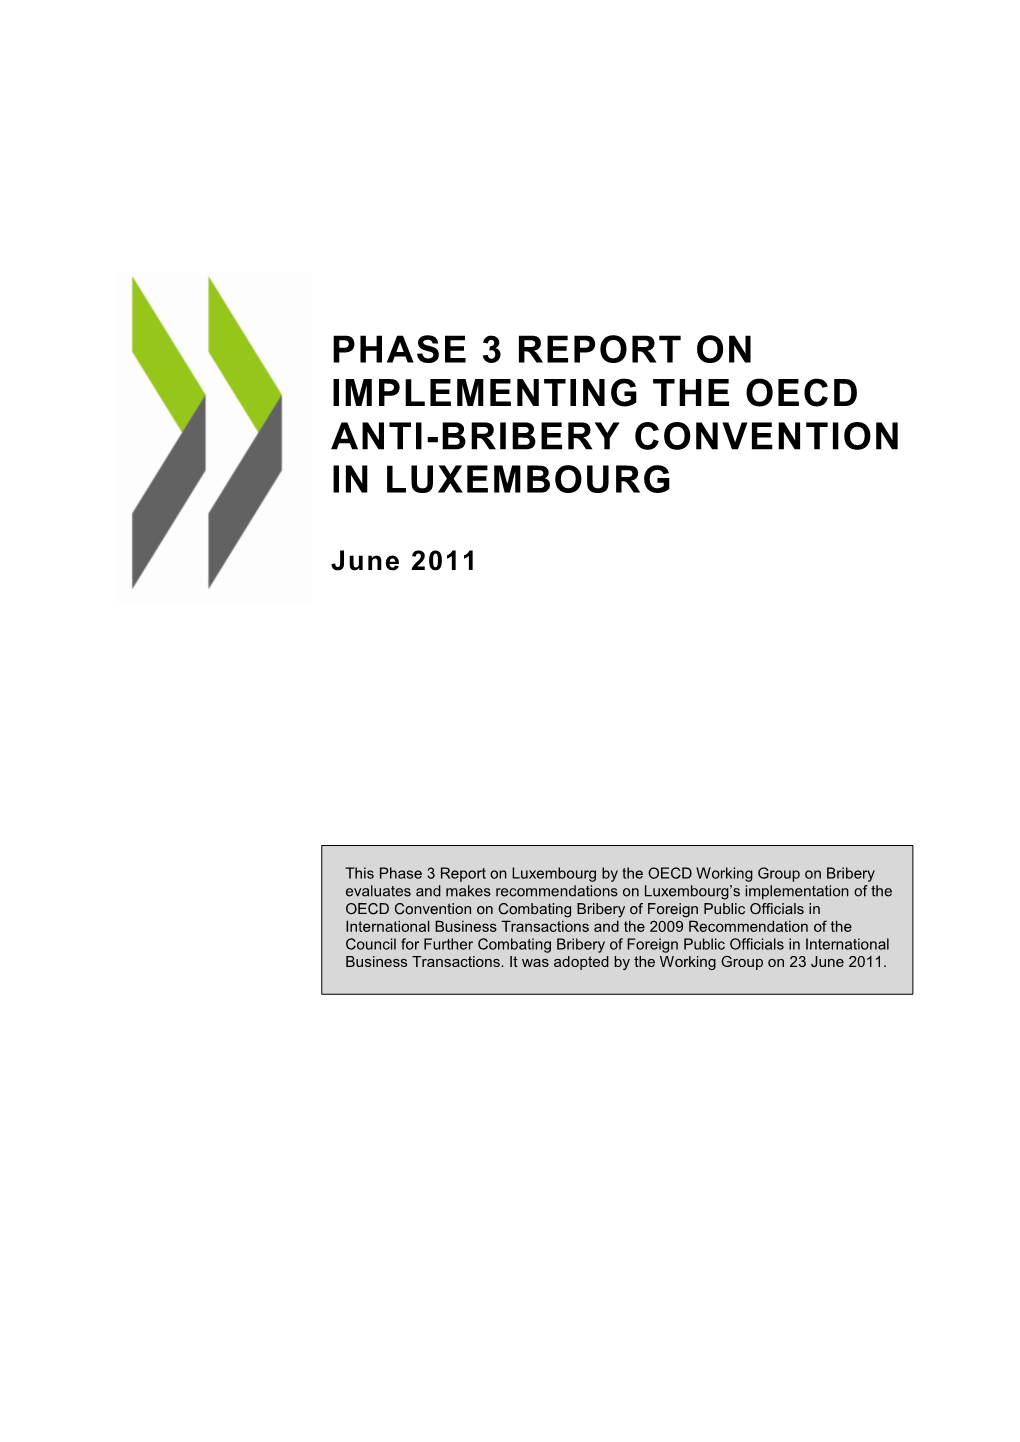 Phase 3 Report on Implementing the Oecd Anti-Bribery Convention in Luxembourg